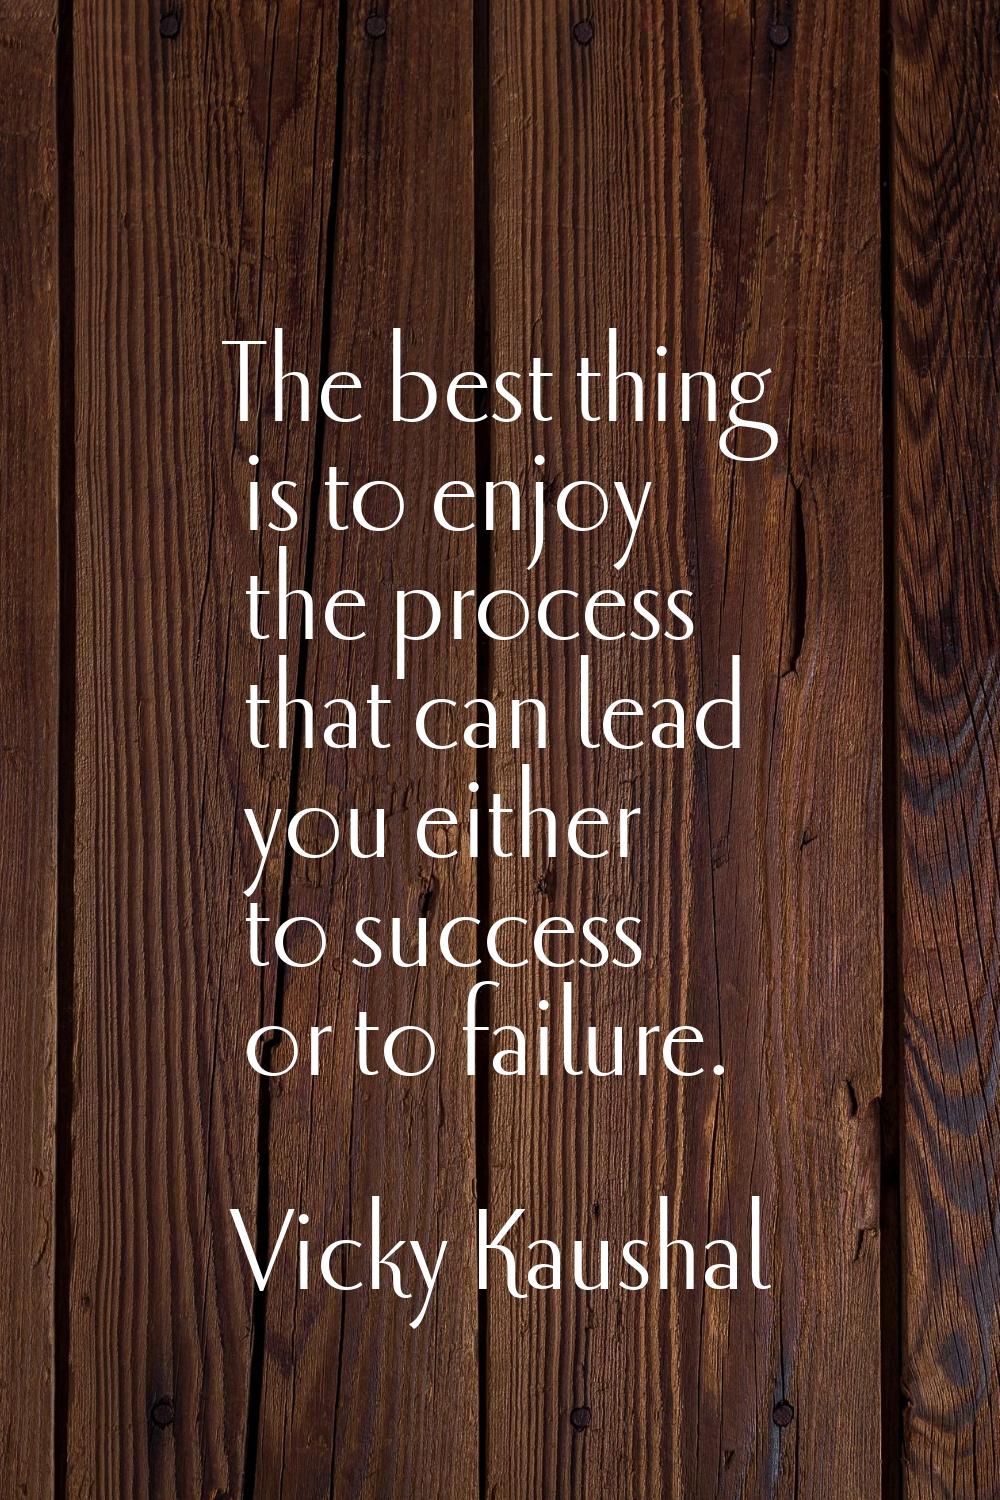 The best thing is to enjoy the process that can lead you either to success or to failure.